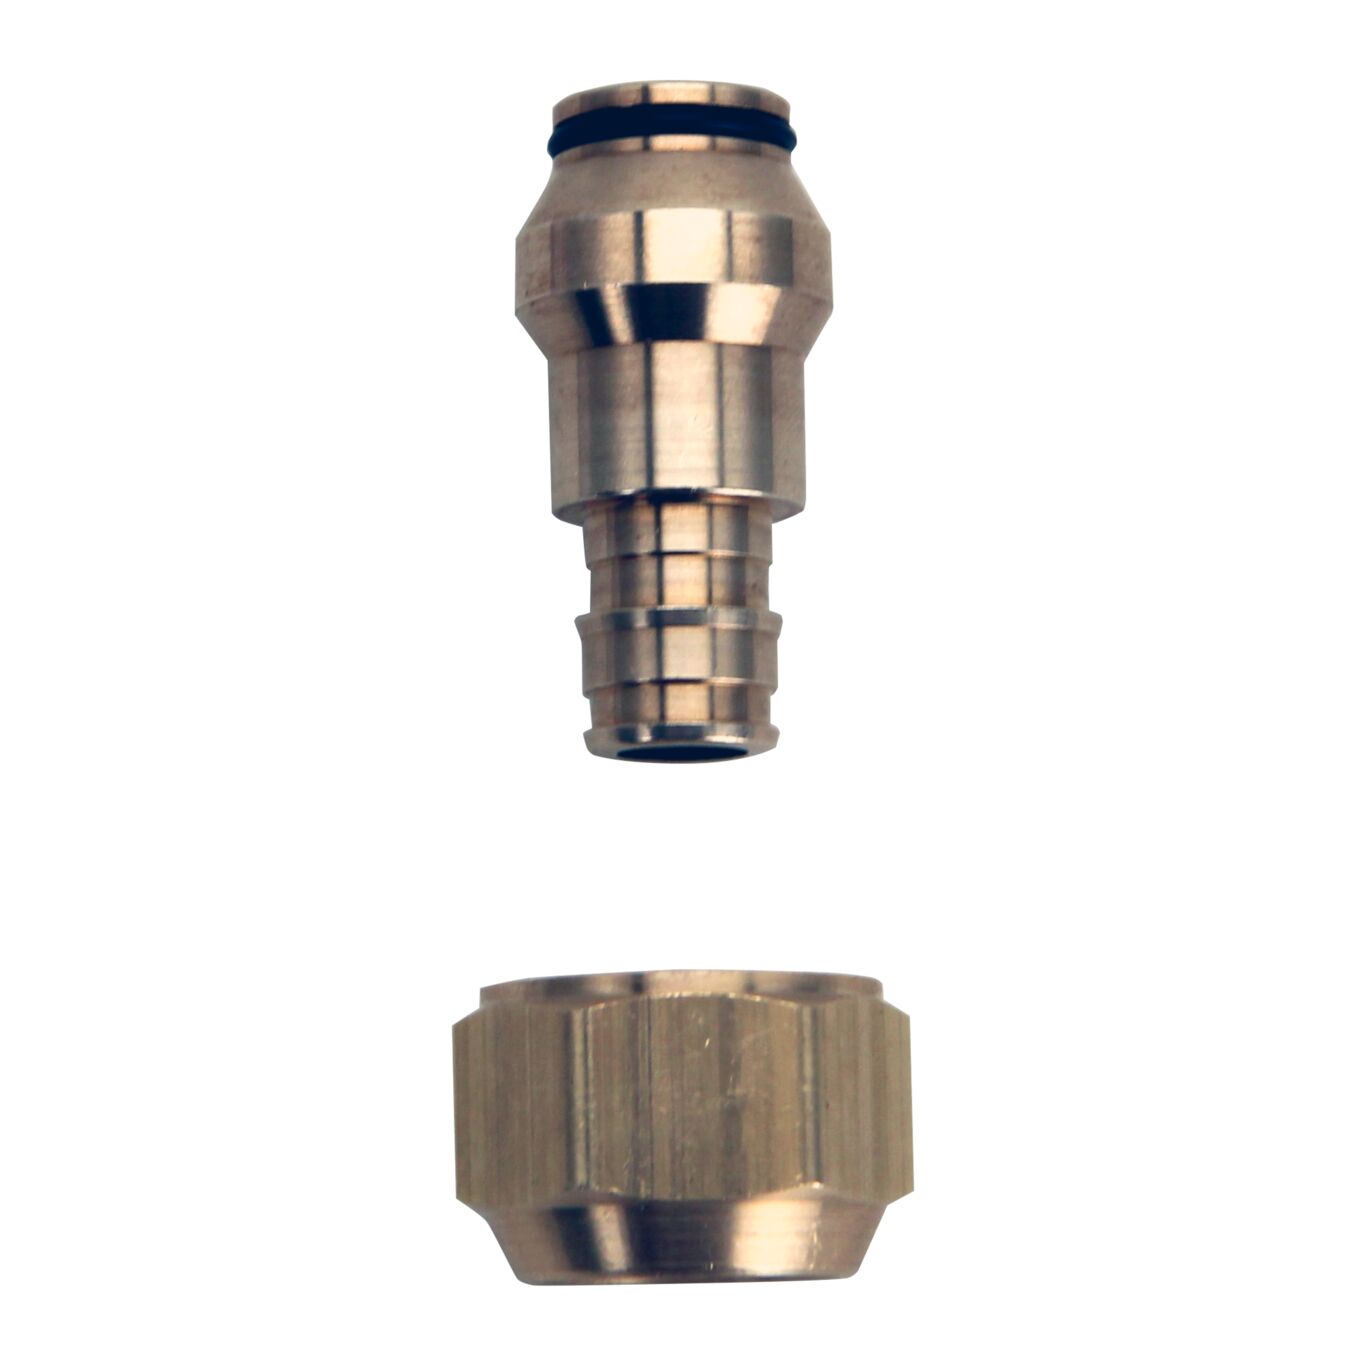 ASTM-Fitting-1 Product Image